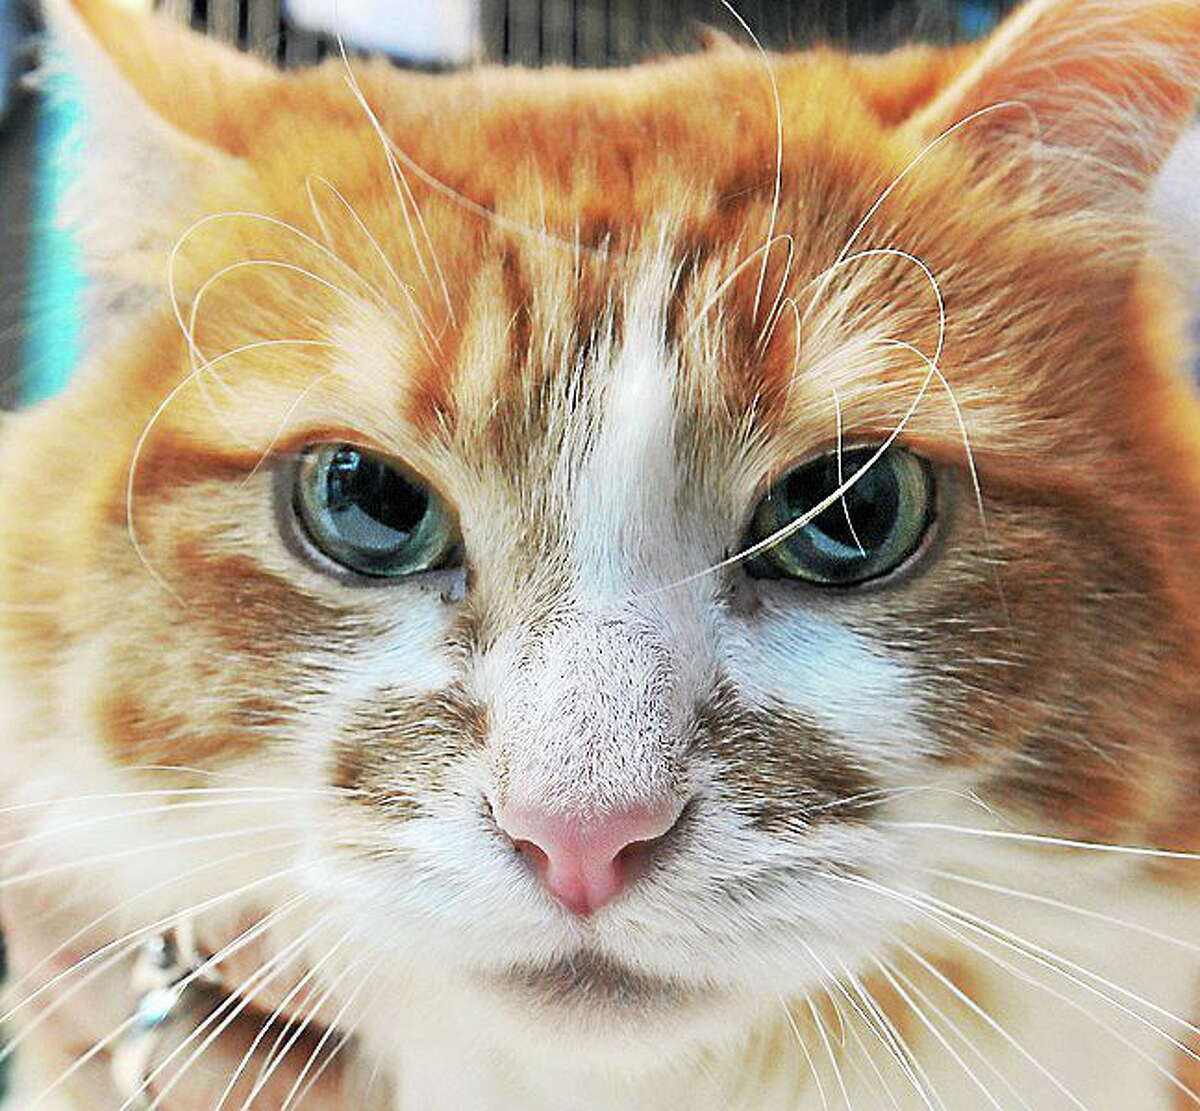 January 31, 2014 - Kimber, a 2-year-old orange and white female. Prefers women over men. Ideally best home would be one where she's the only animal. Call CATALES, Inc. at 860-344-9043. CATALES, Inc. is a non-profit no-kill organization consisting of volunteers dedicated to improving and enriching the lives of homeless cats and kittens. http://www.catales.org/kimber-p-849.html (Catherine Avalone/The Middletown Press)